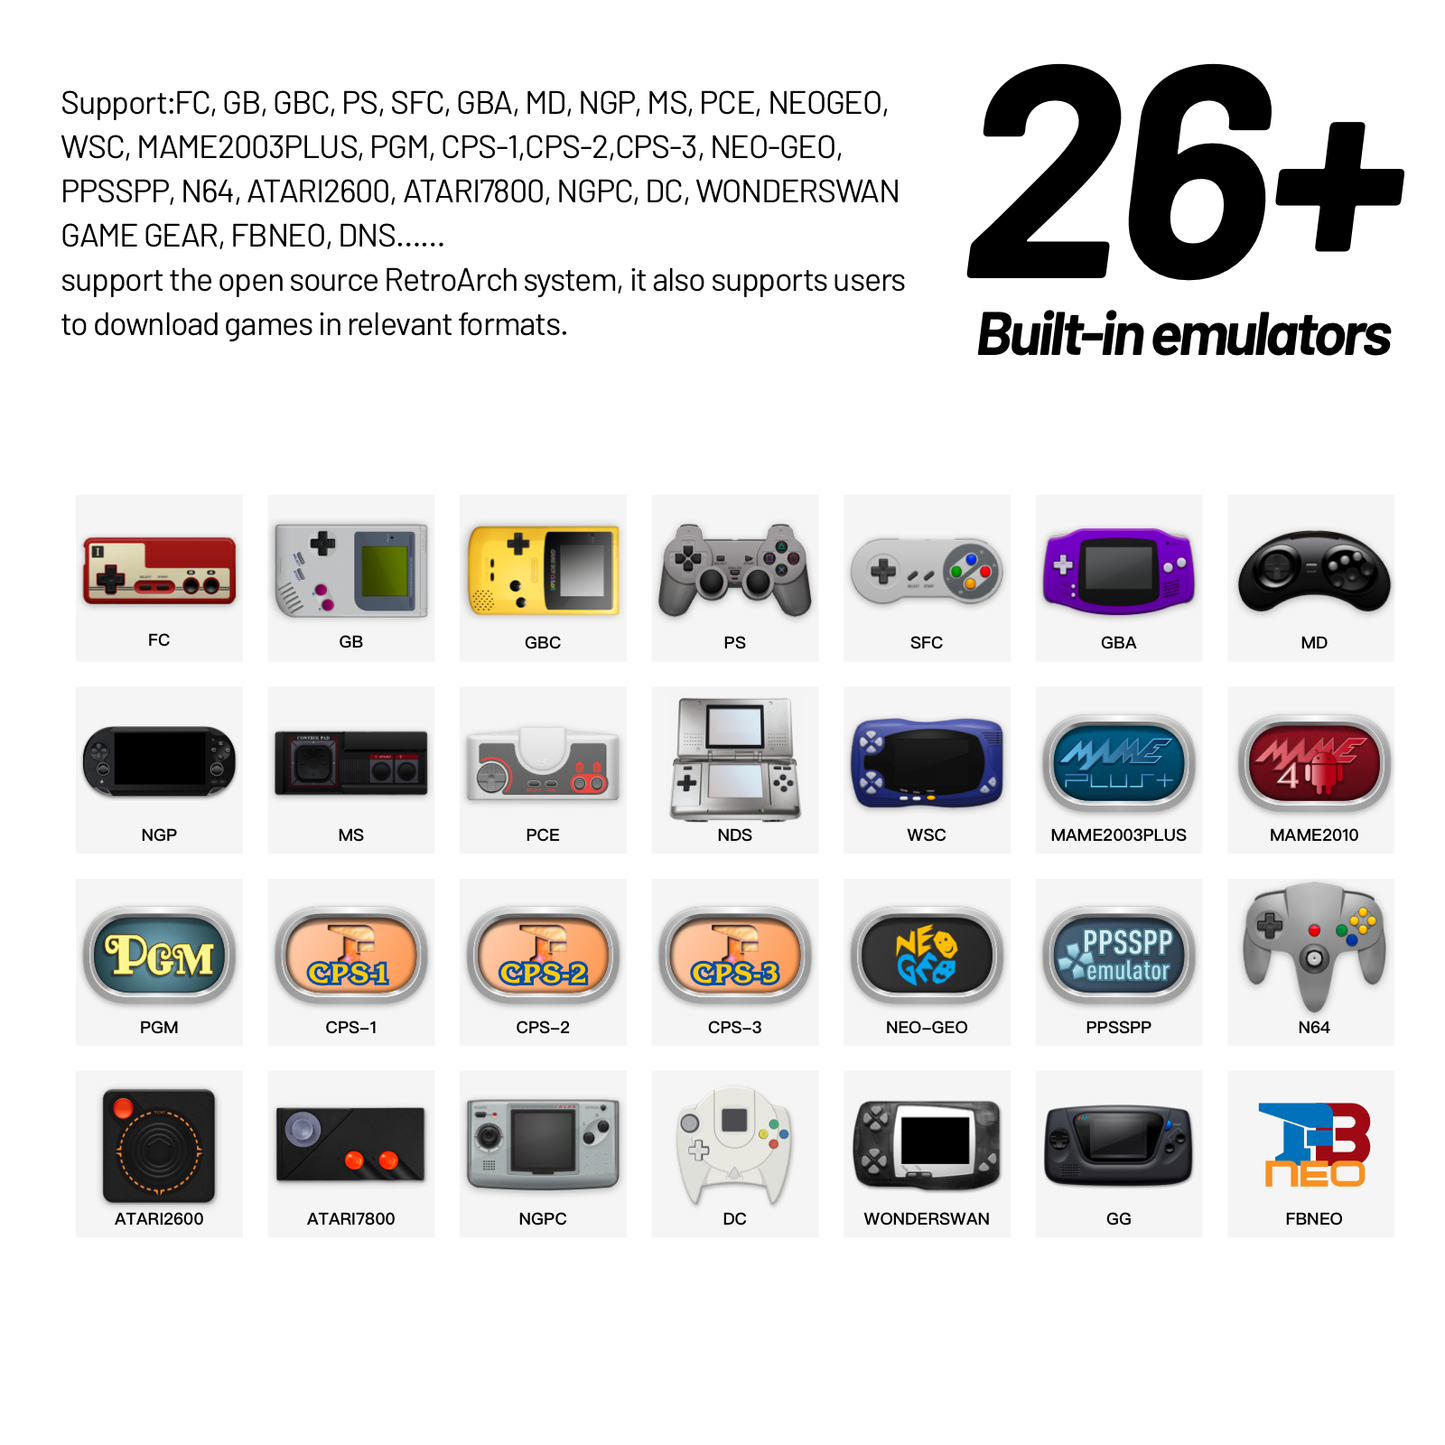 TRIMUI 256G SMART PRO Handheld Gaming Console for Gift Ideas, 1 Piece Portable Retro Games Consoles with 4.96 Inch IPS Screen, RGB ambient light，Support Linux,  Eye Protection Game Console for Kids, Handheld Gaming Device, Gaming Accessories